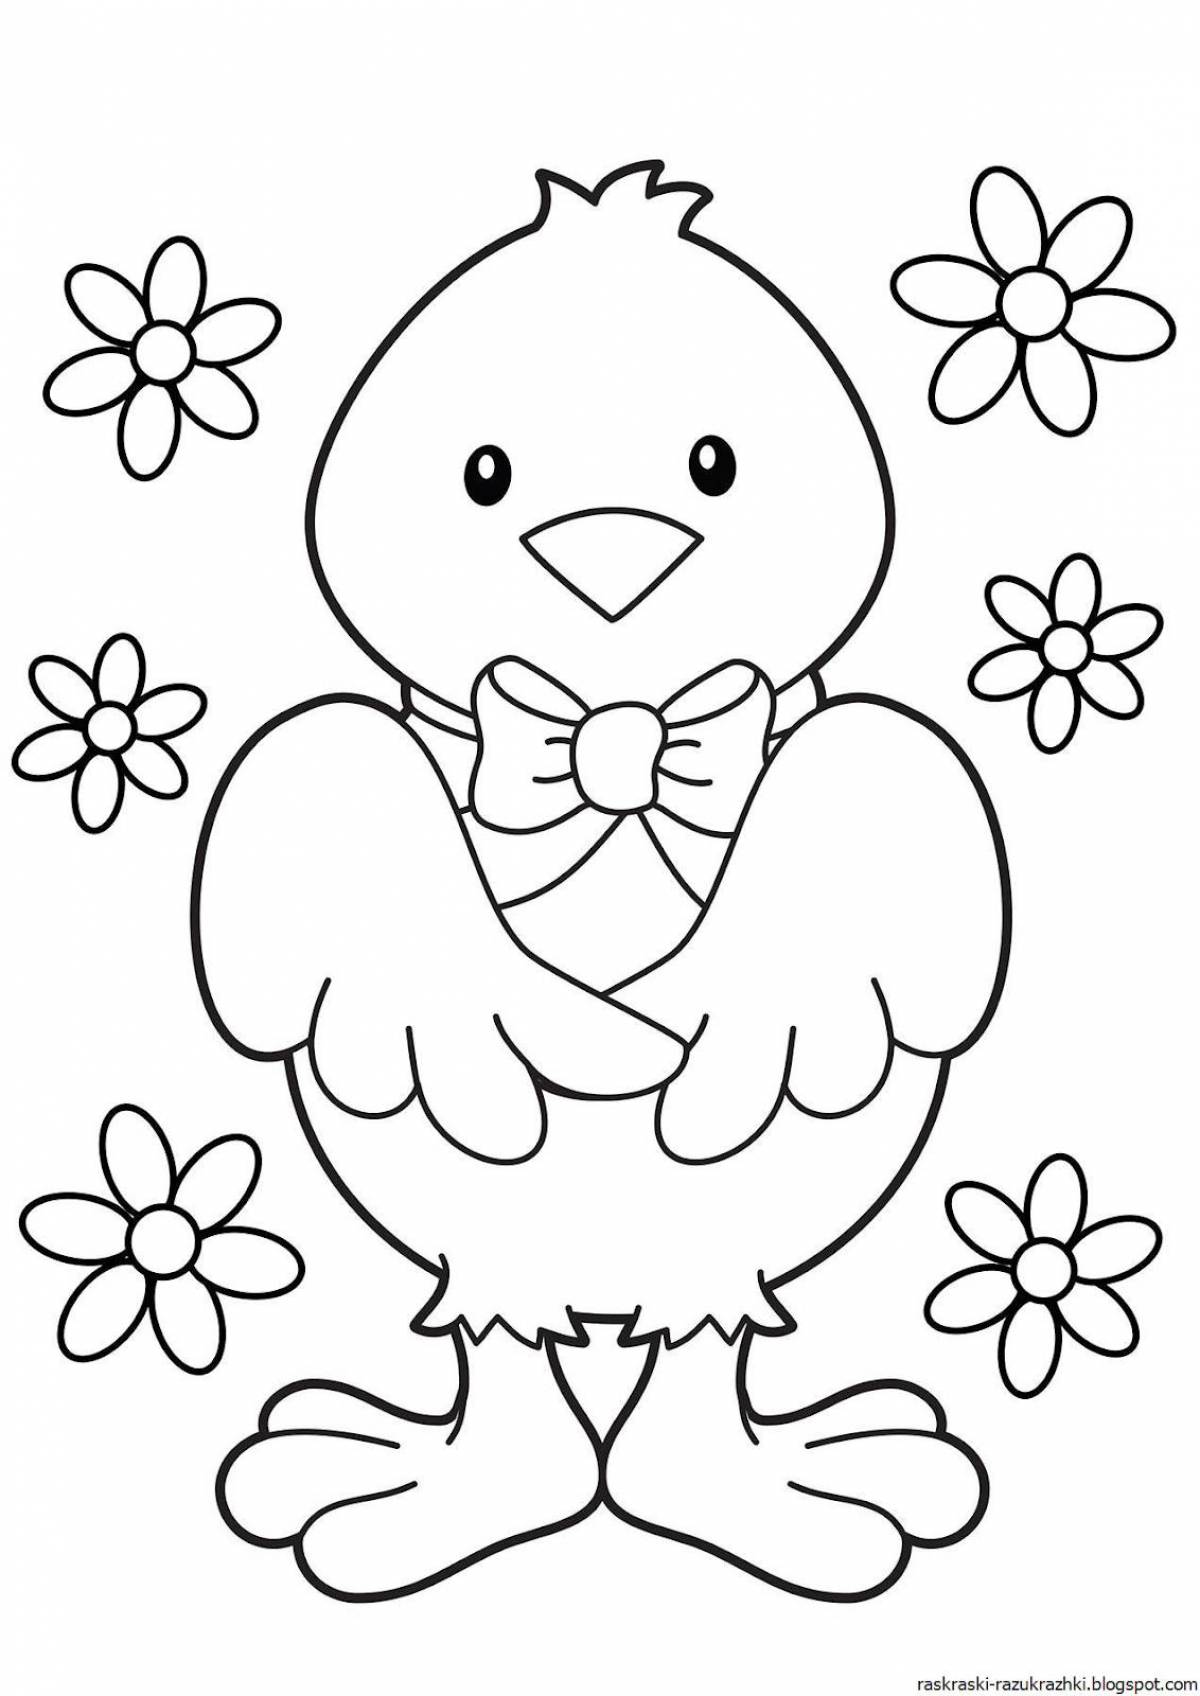 Fancy coloring book for kids